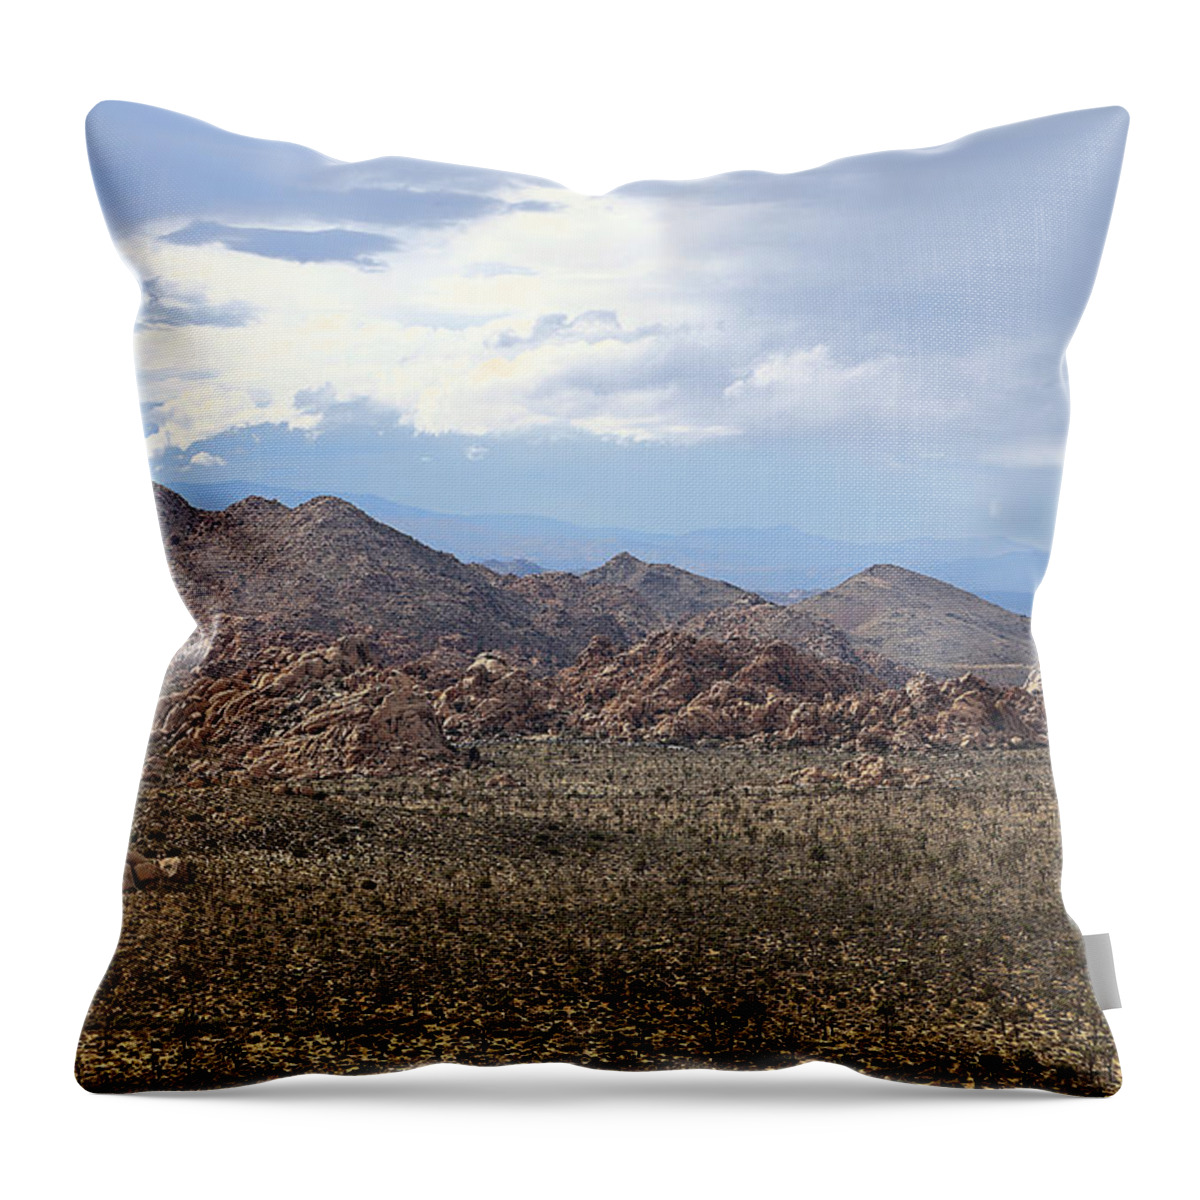 Lost Horse Valley Throw Pillow featuring the photograph Lost Horse Valley by Viktor Savchenko